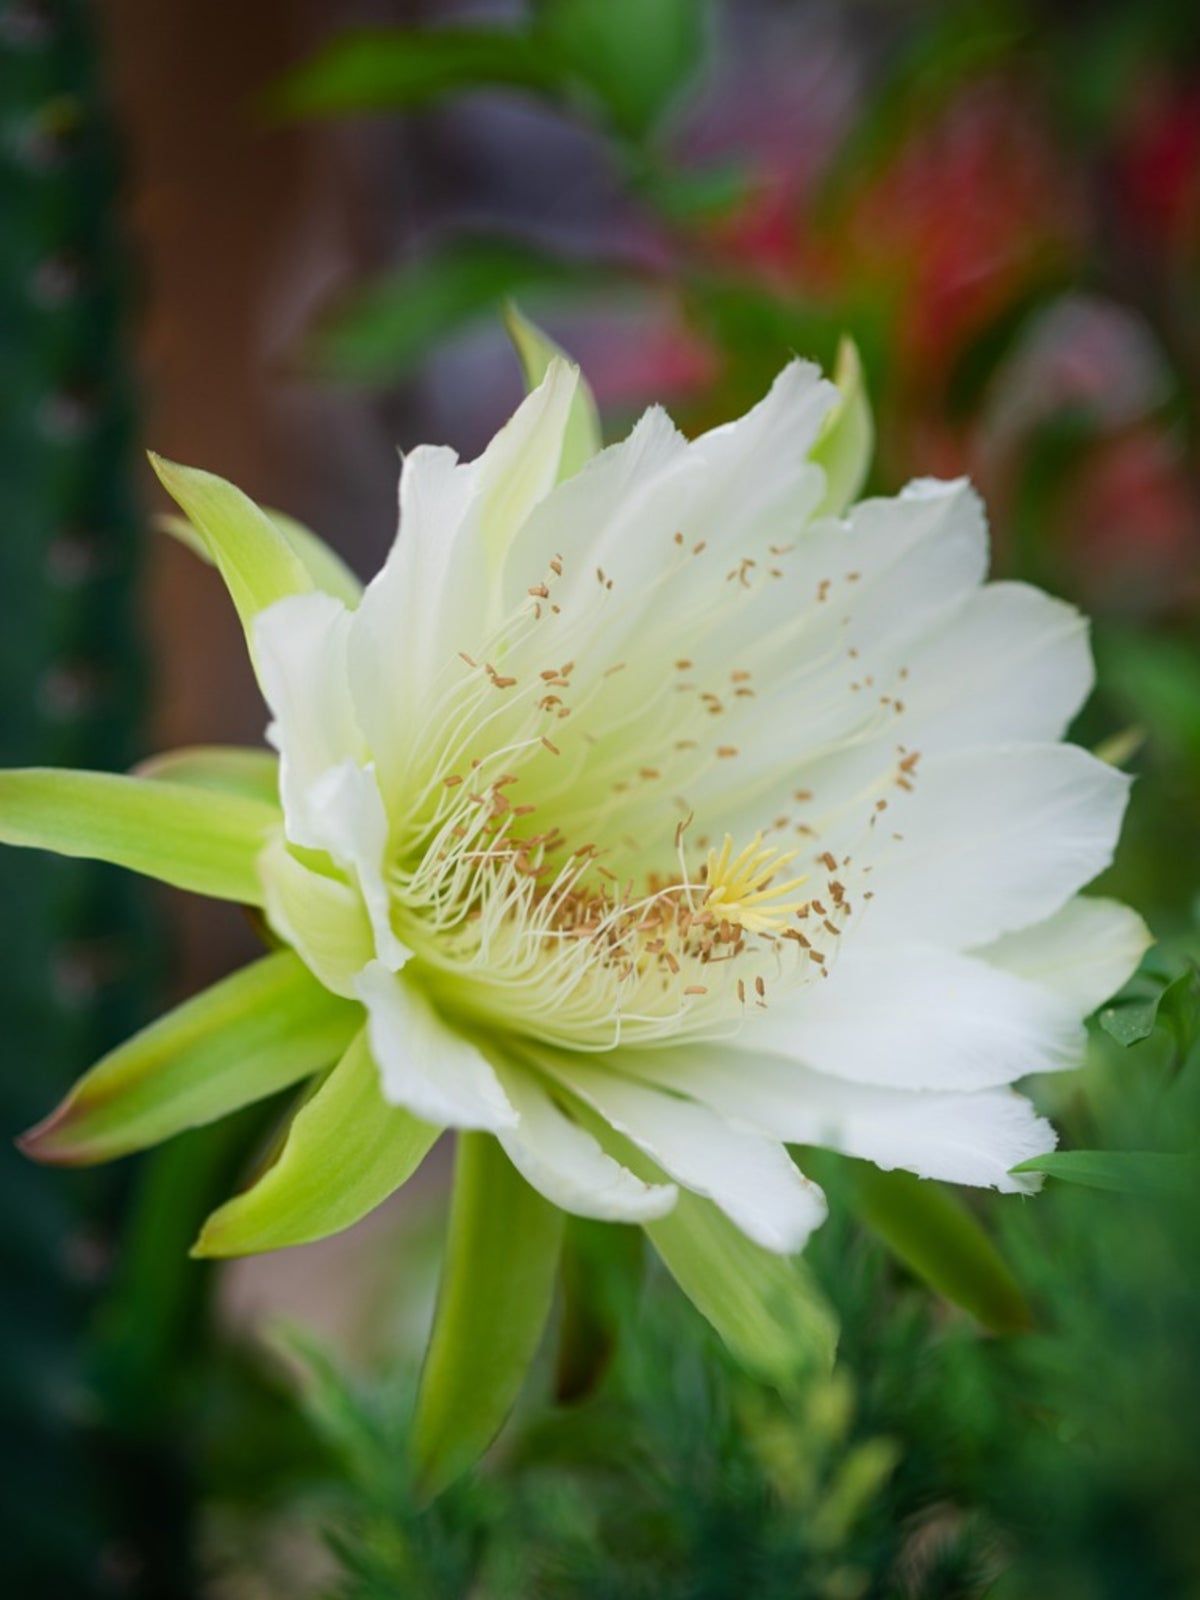 How to Make Night-Blooming Cereus Bloom